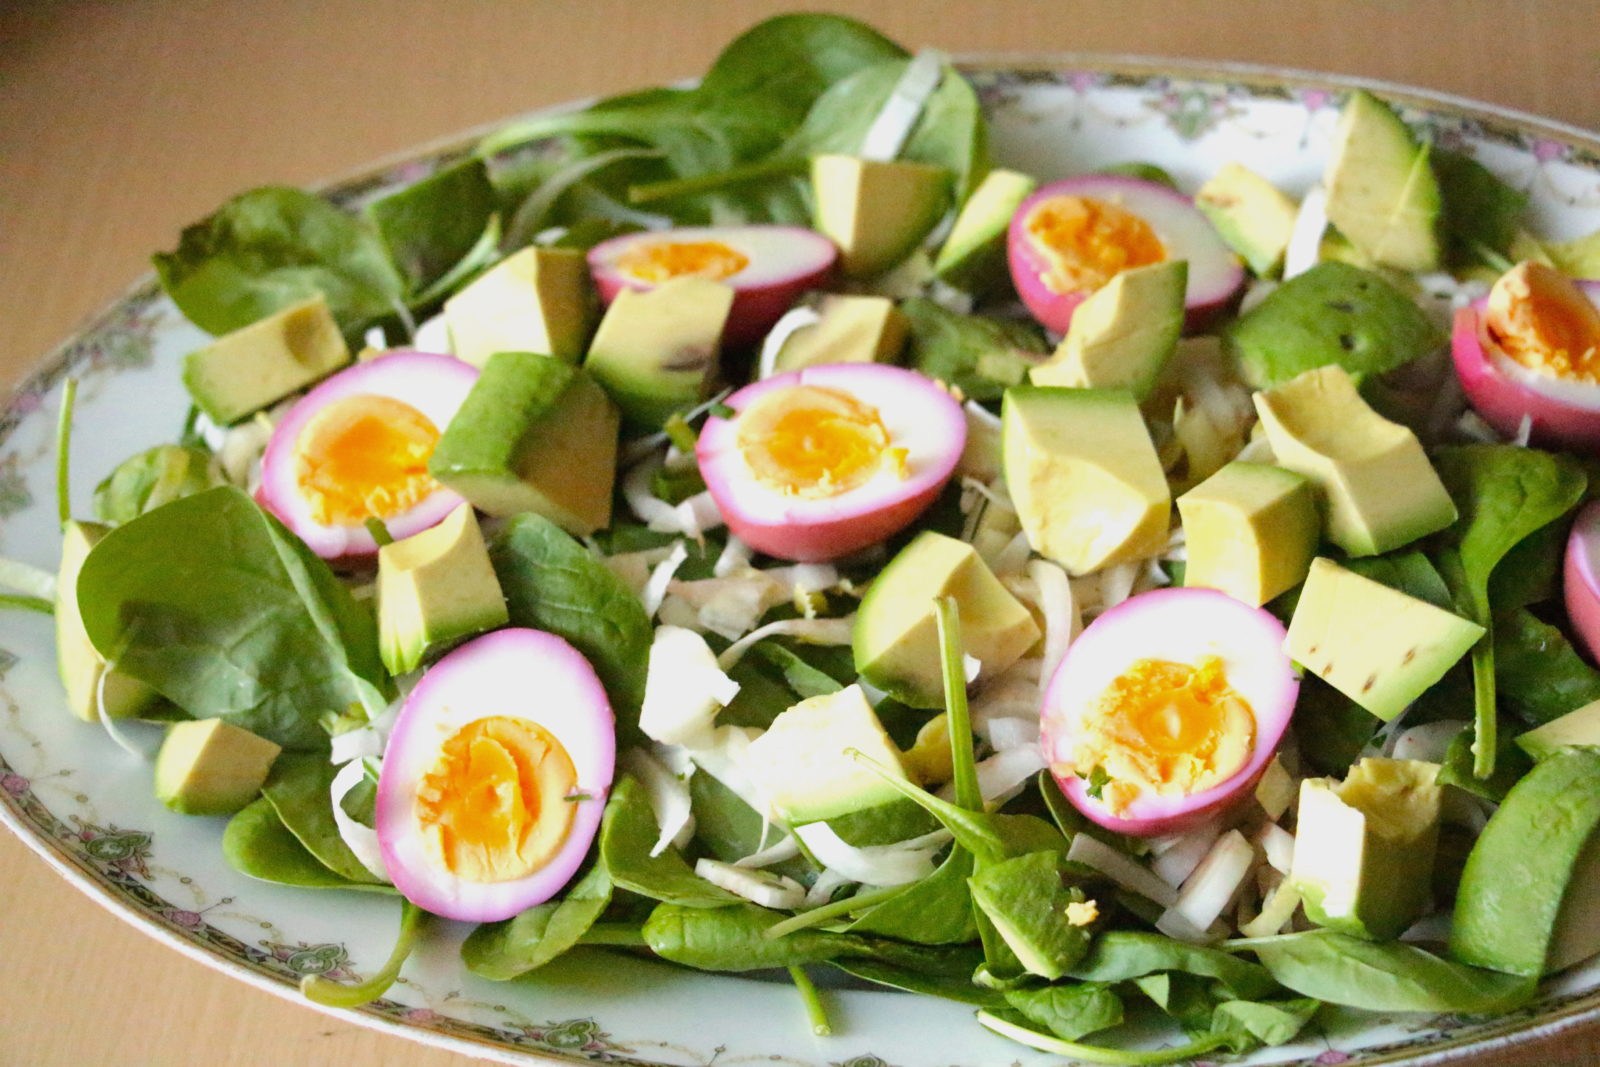 Beet-Pickled Egg and Avocado Salad